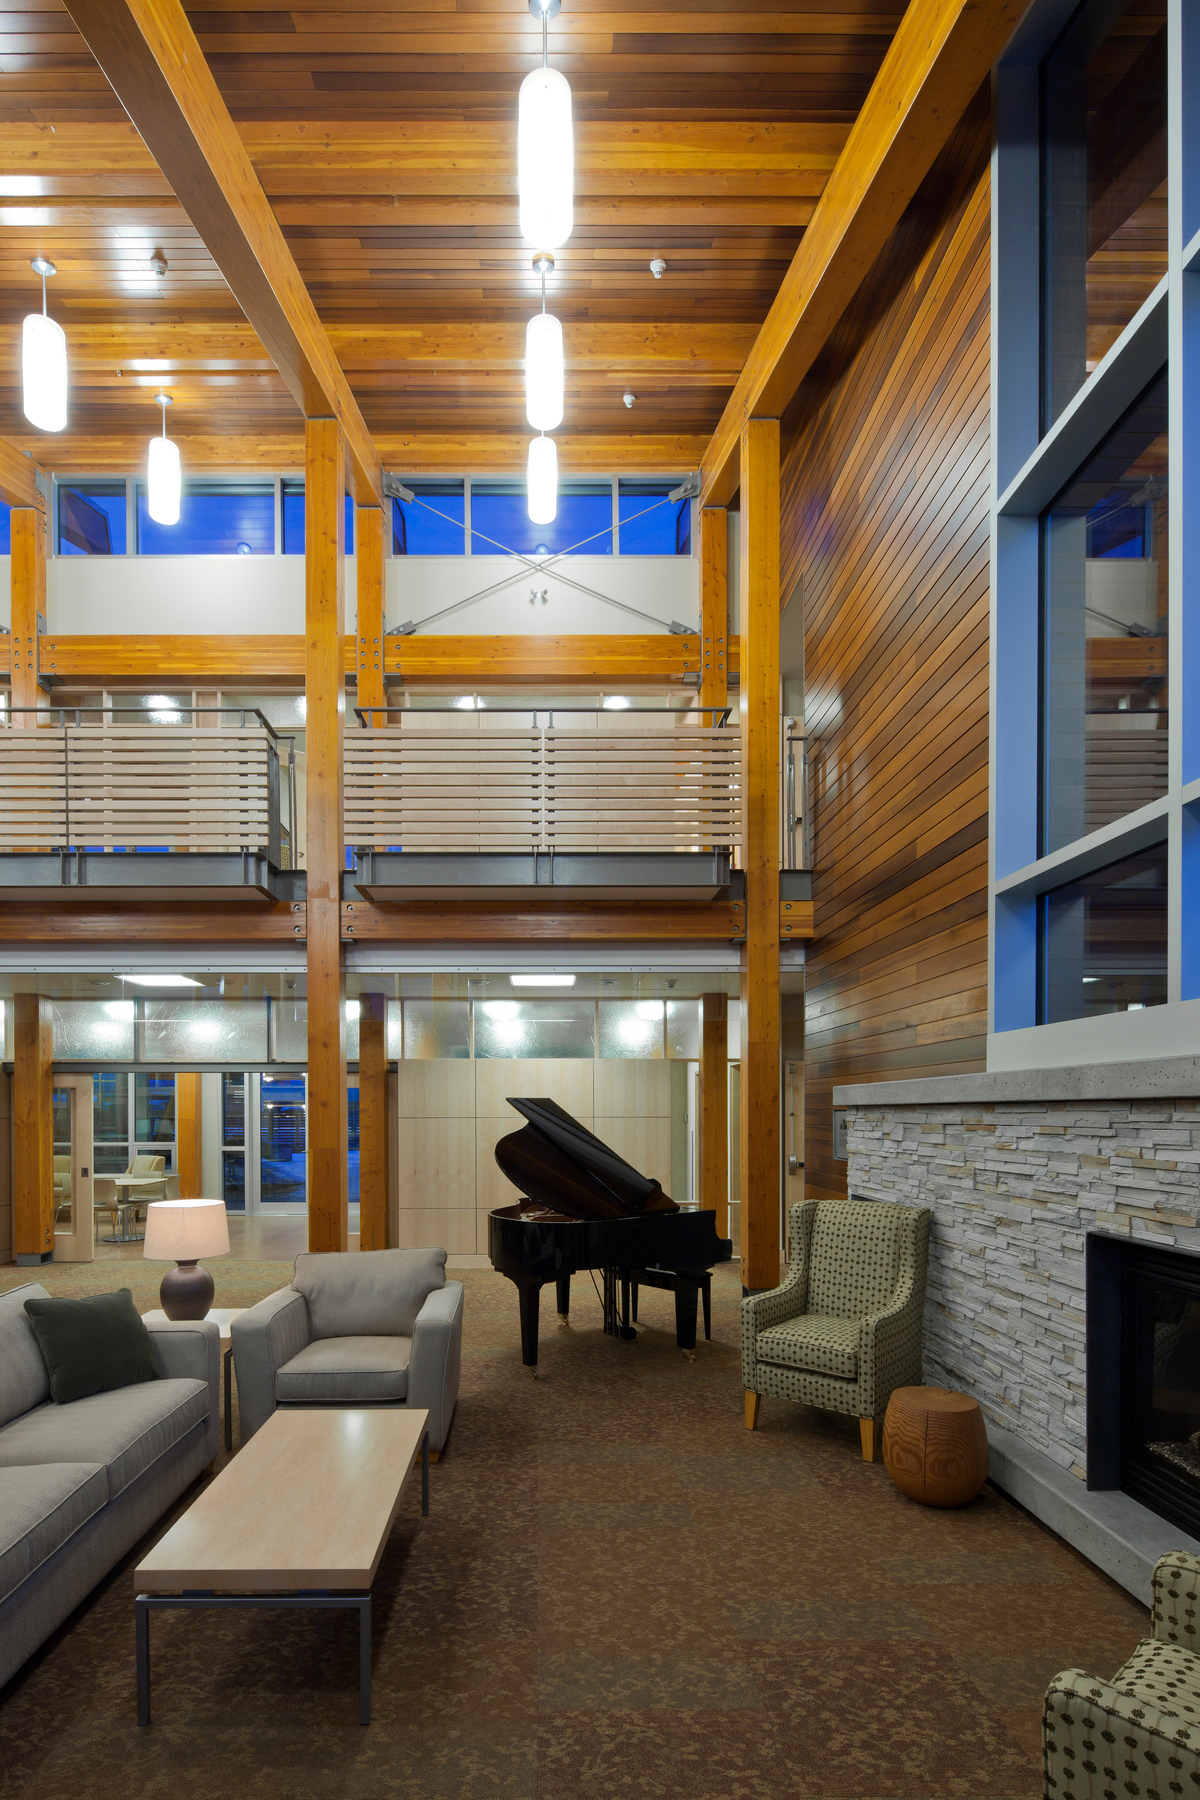 Interior evening social area view inside low rise two story Canadian Cancer Society Kordyban Lodge, showing glue-laminated timber (Glulam), and decorative siding